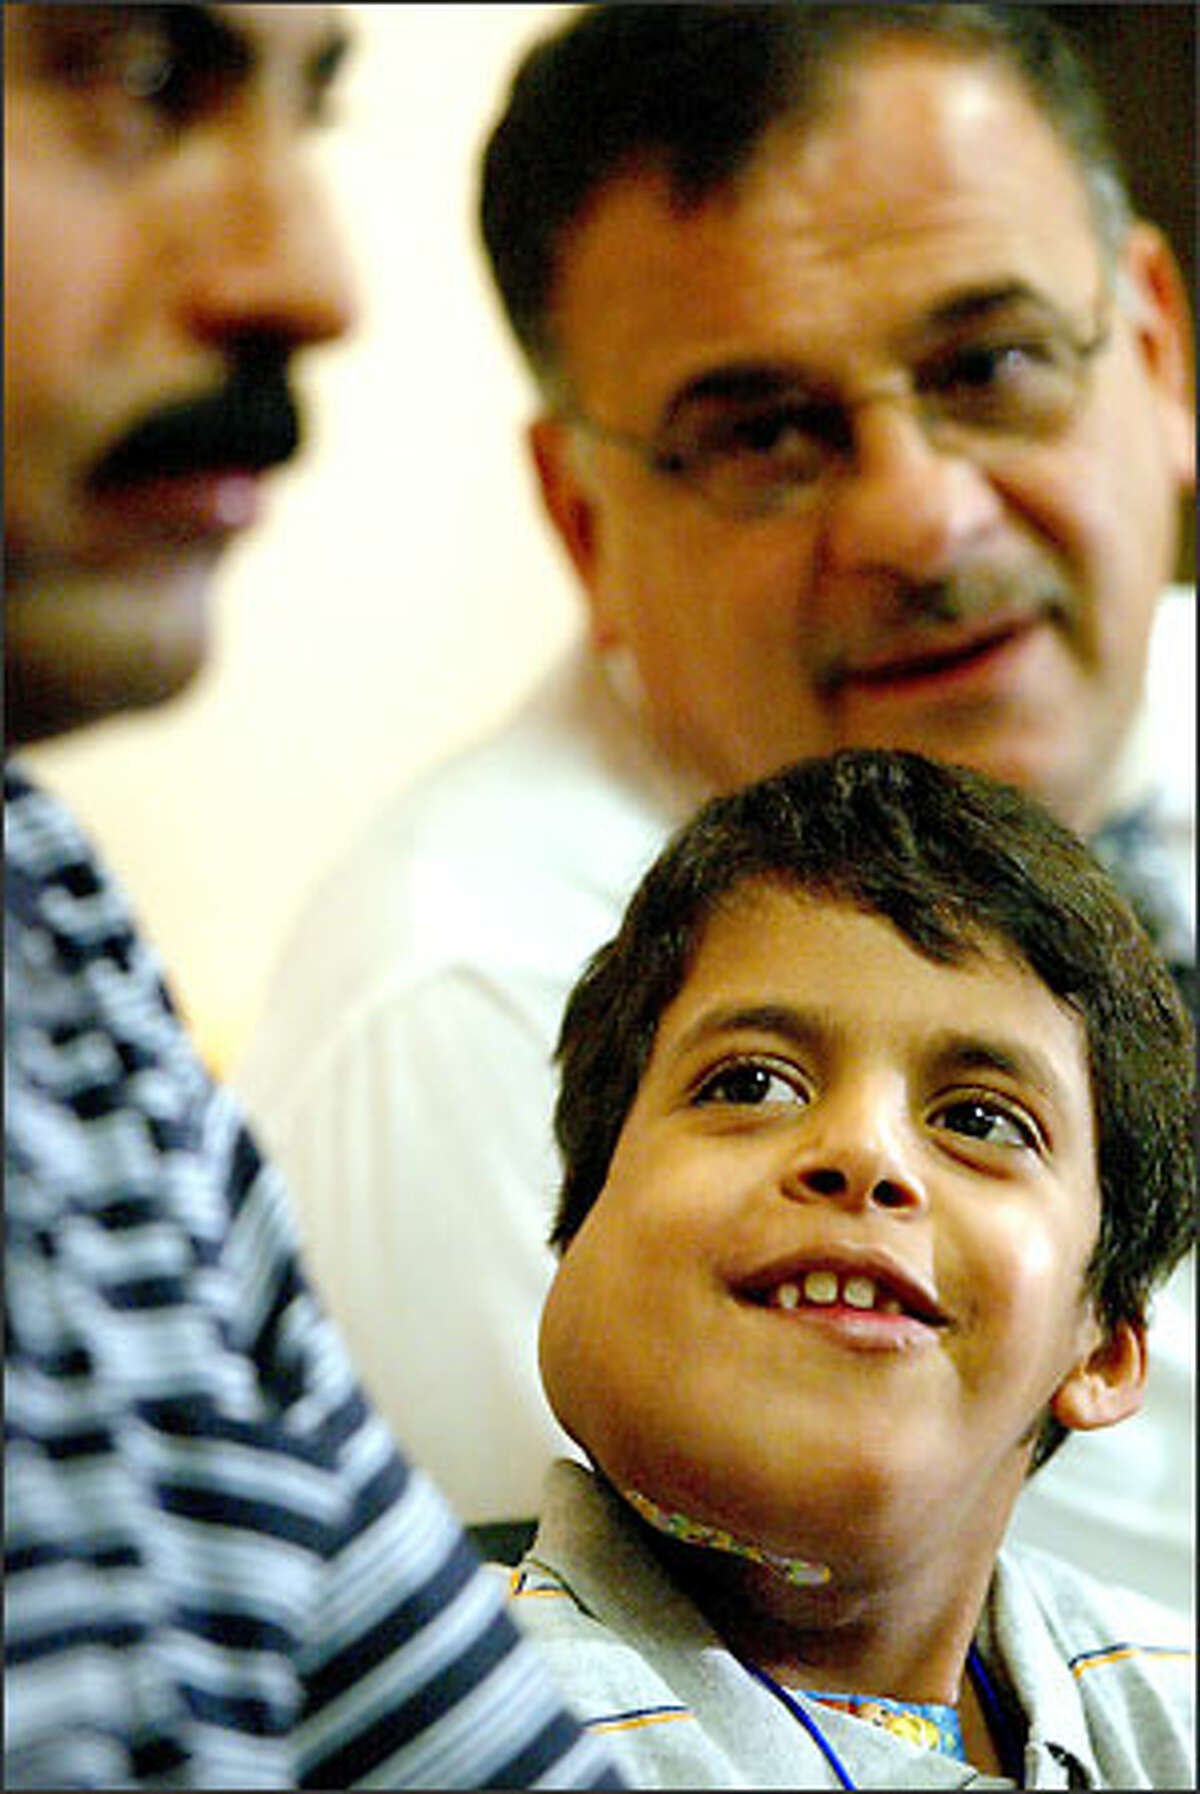 Ali Mousa Souad, 8, listens to Walid Farhoud's translation of a reporter's question for him and waits for his father, Mousa Souad, at left to answer for him.